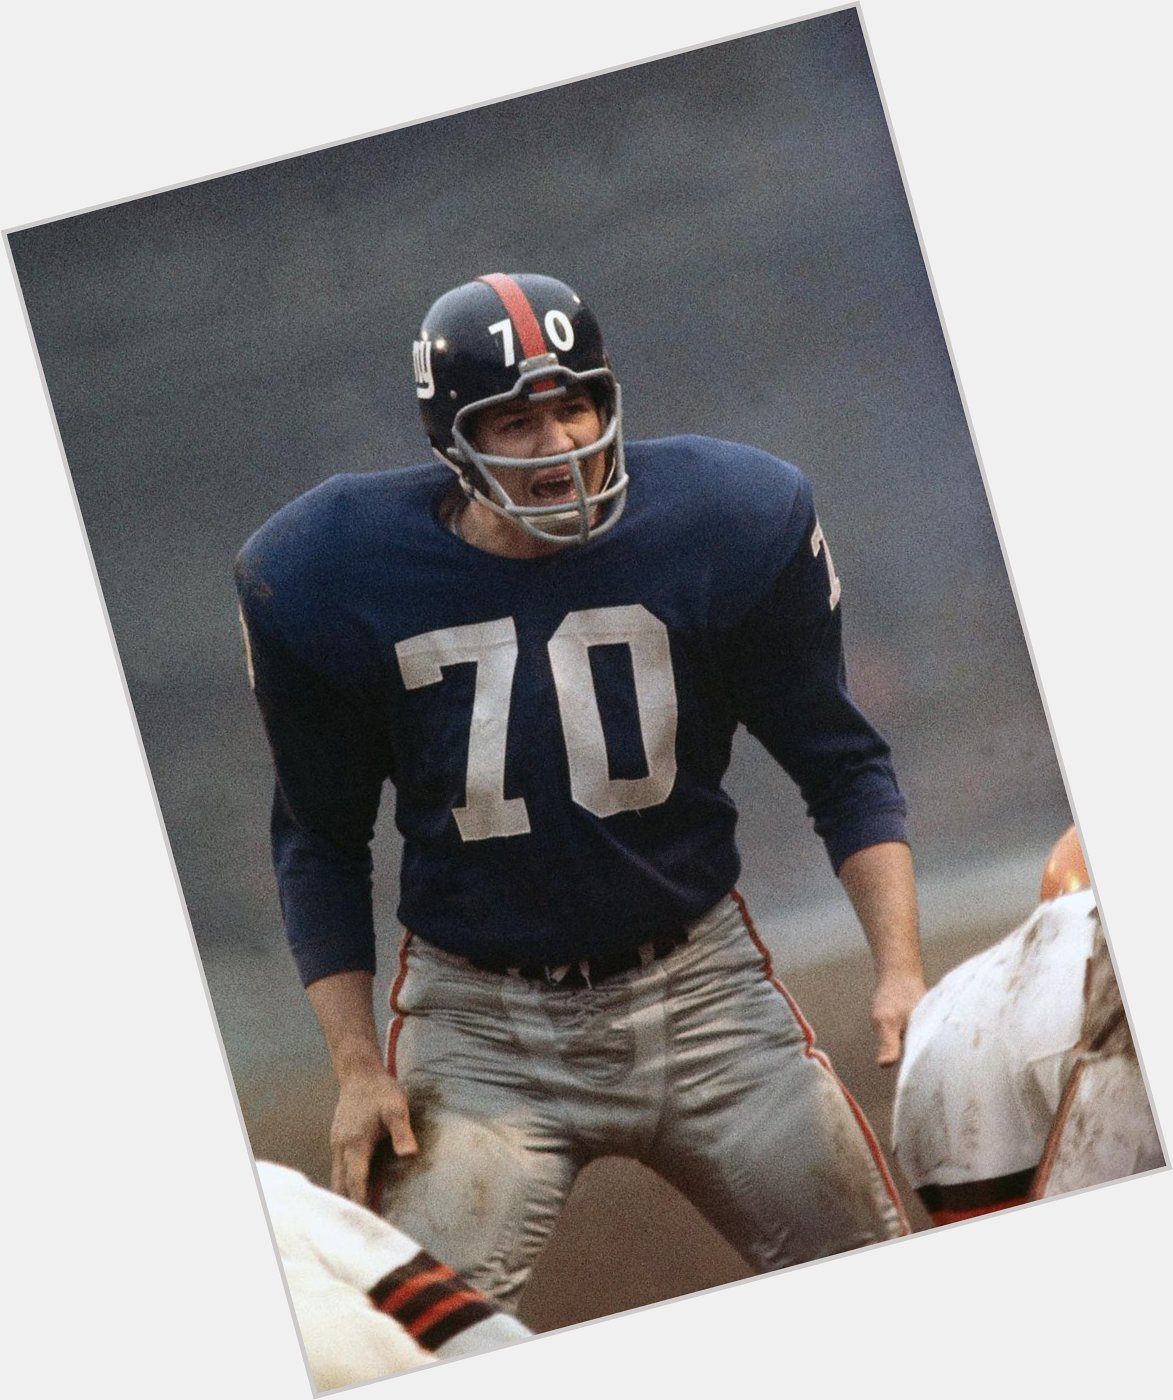 Happy BDay to lifetime member and Hall of Famer Sam Huff! 